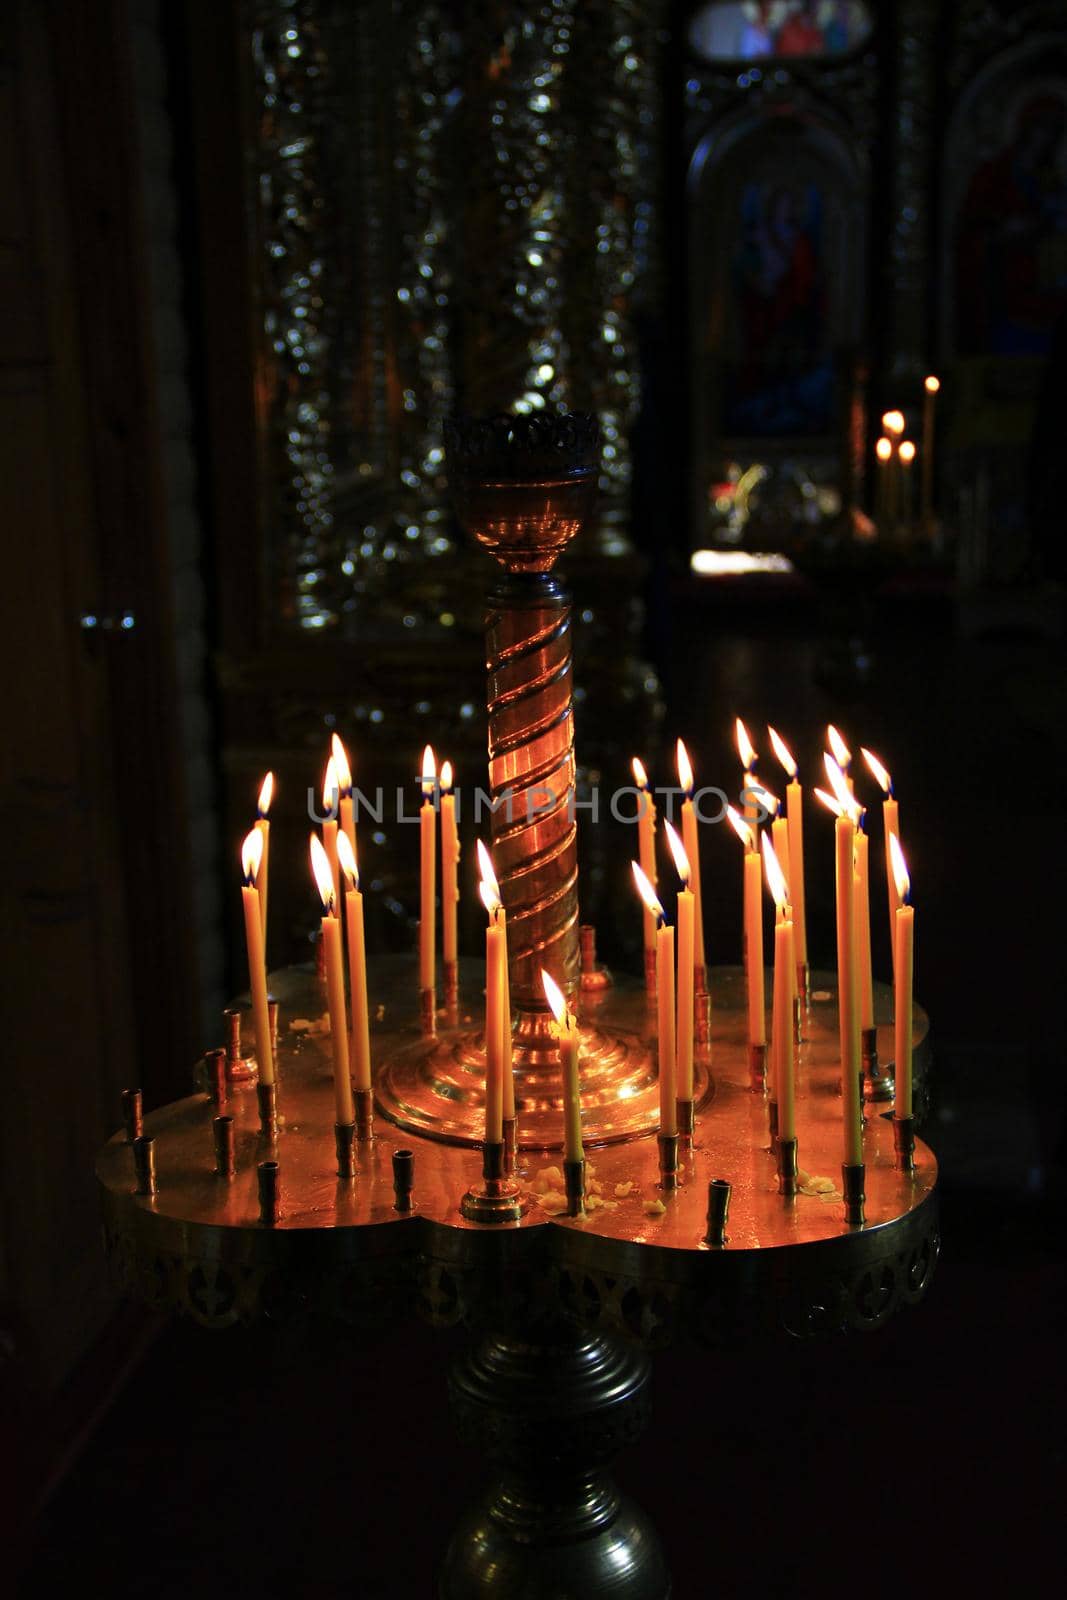 church candles on candlesticks in church burn in darkness